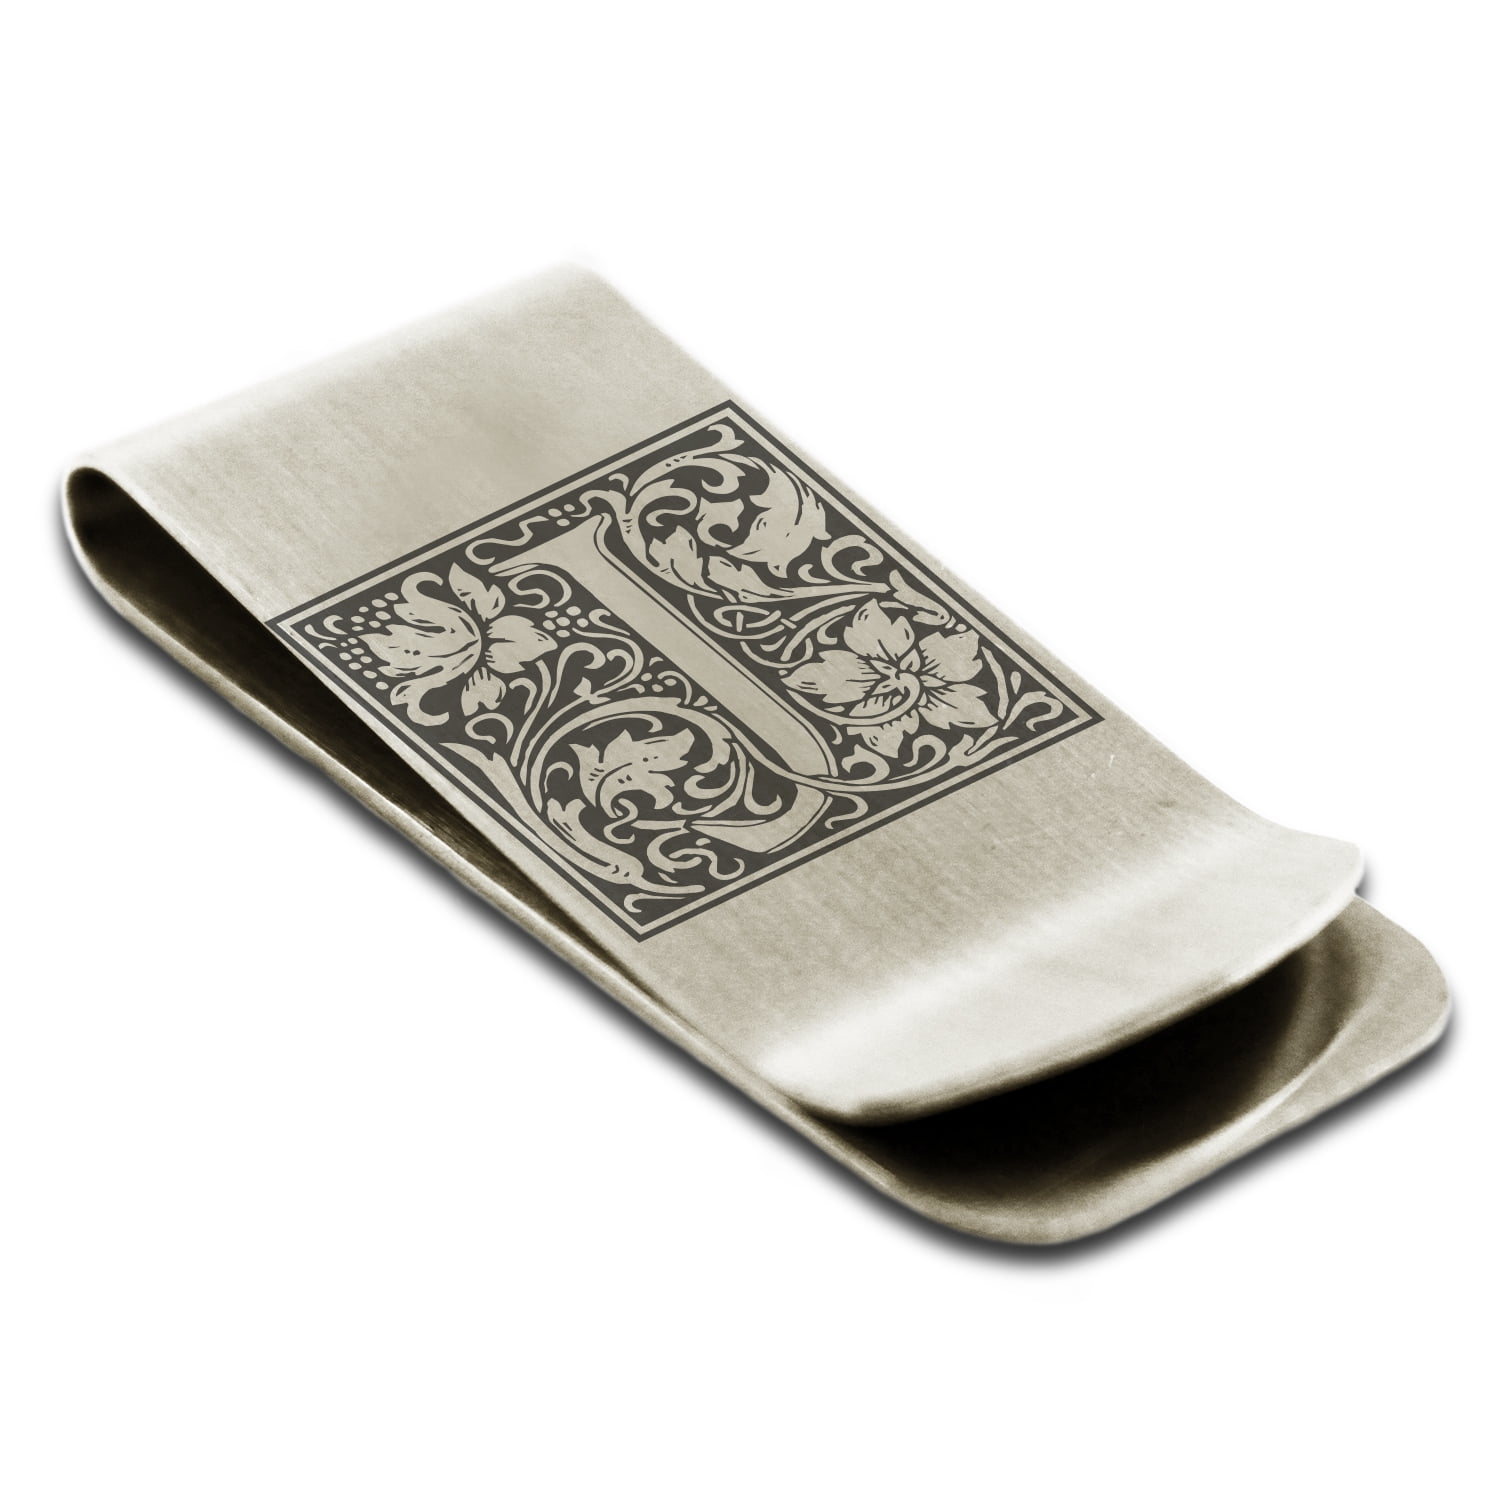 Tioneer Stainless Steel Letter P Initial Floral Box Monogram Engraved Money Clip Credit Card Holder